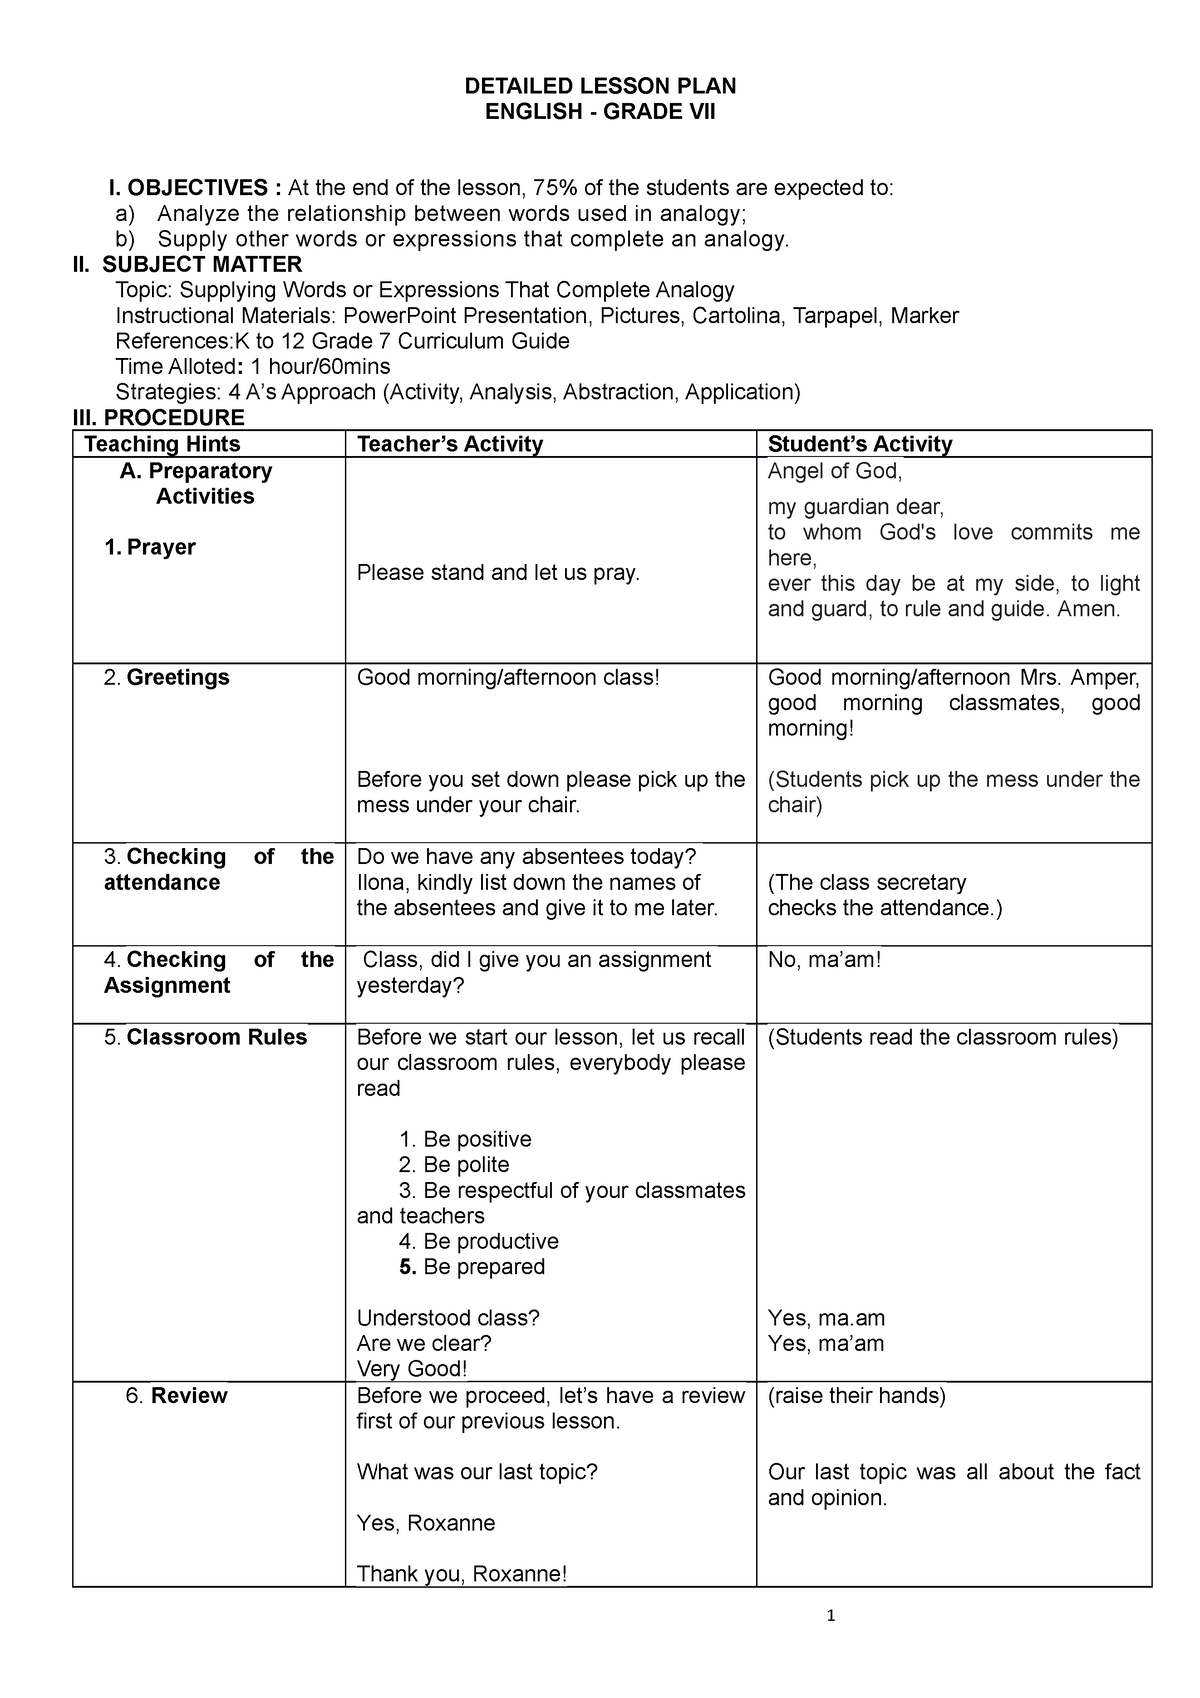 Supplying Words Or Expressions That Complete Analogy Detailed Lesson Plan English Grade Vii 0233